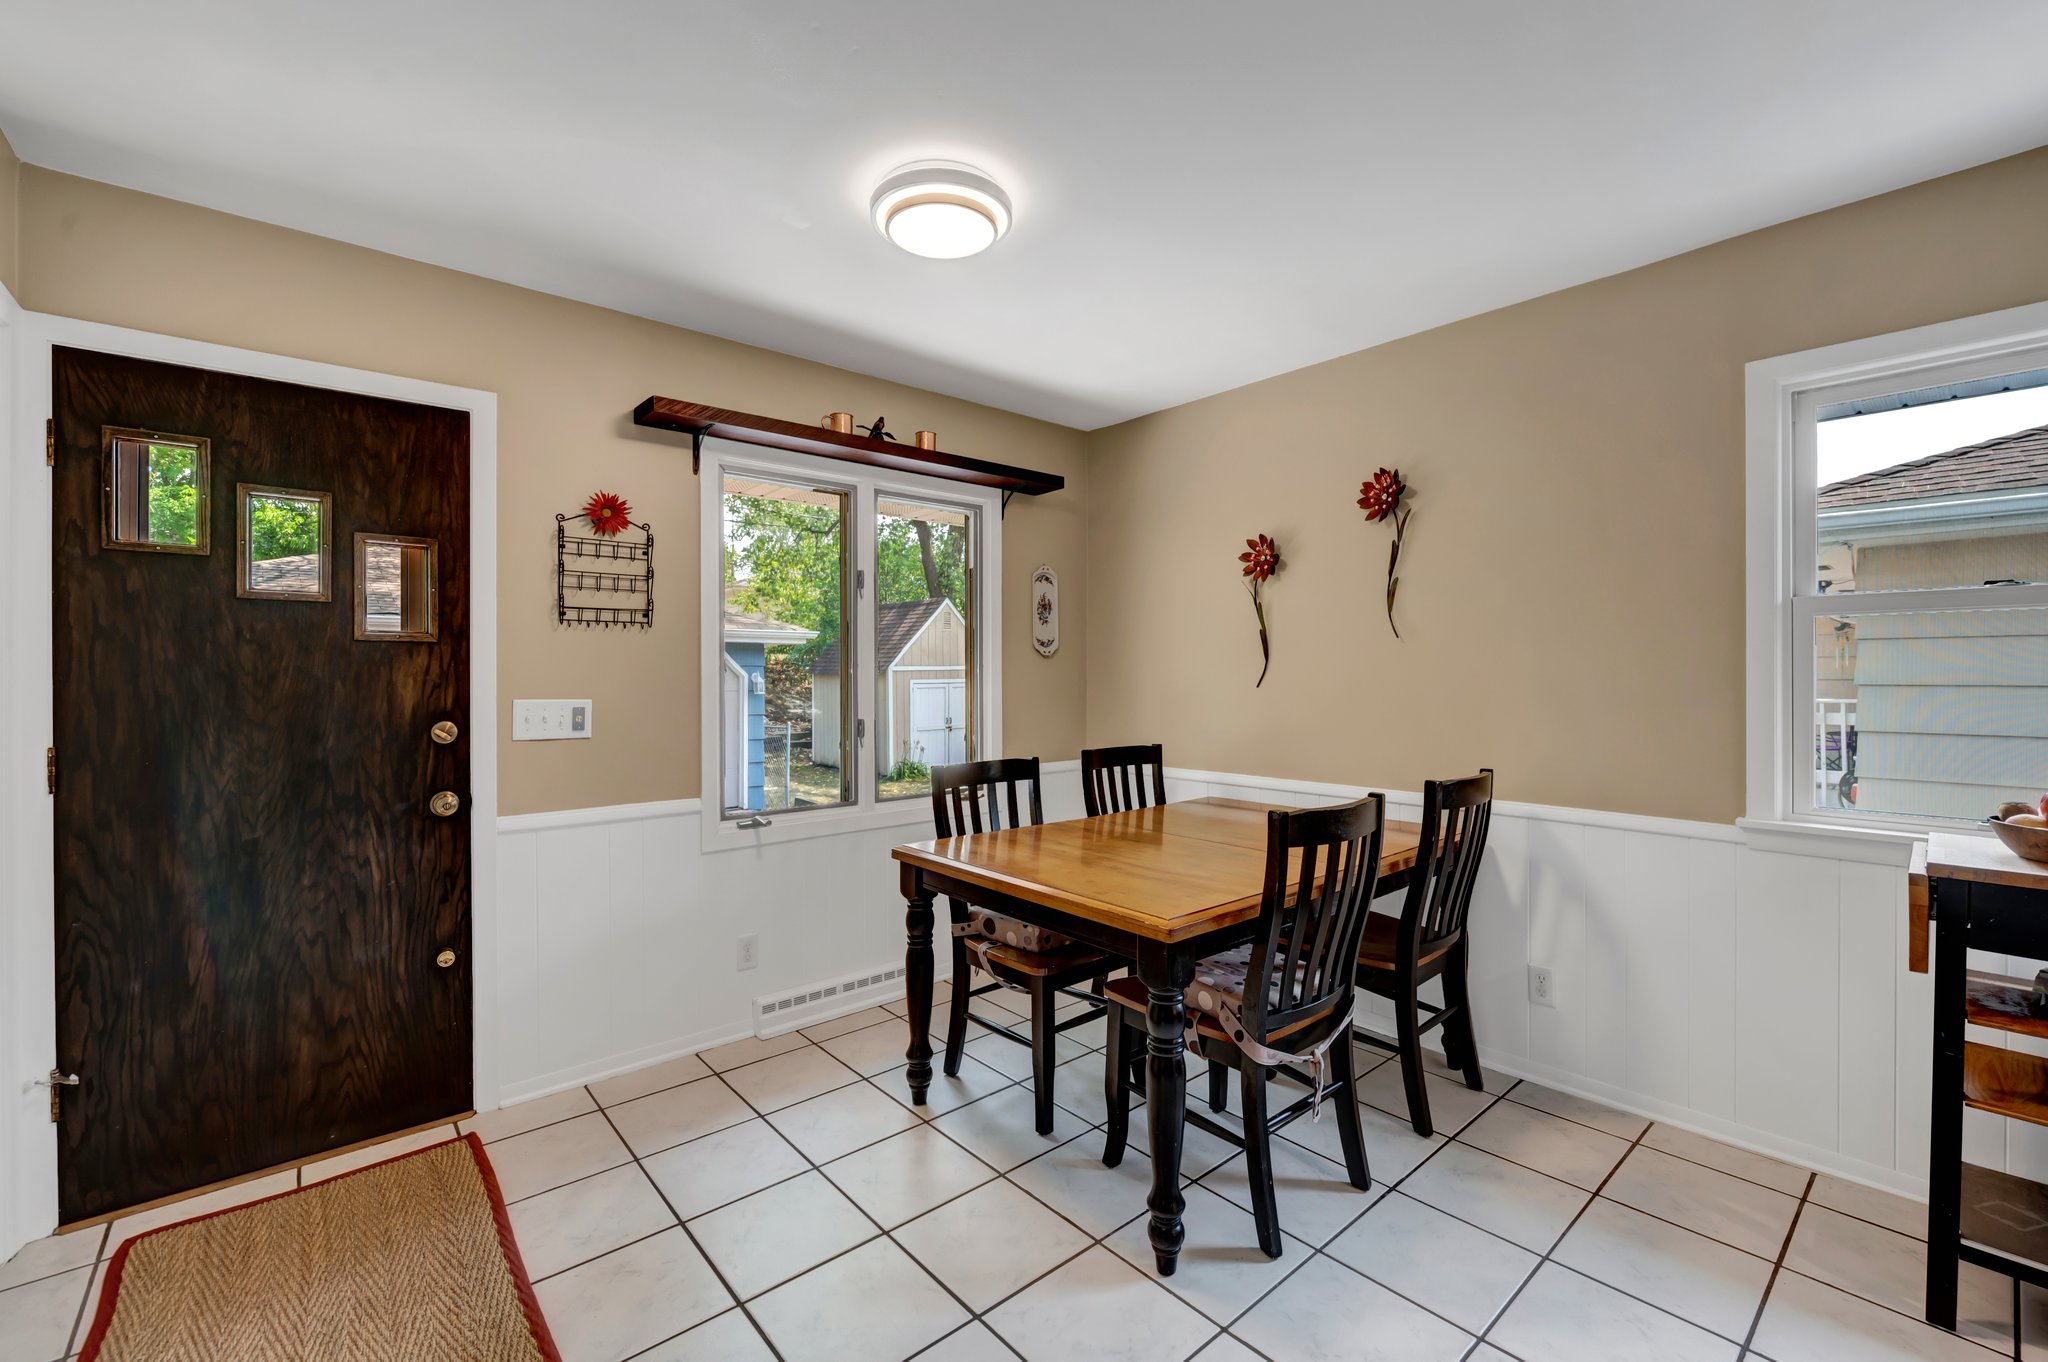 Breakfast/Dining area can support a large family size table.